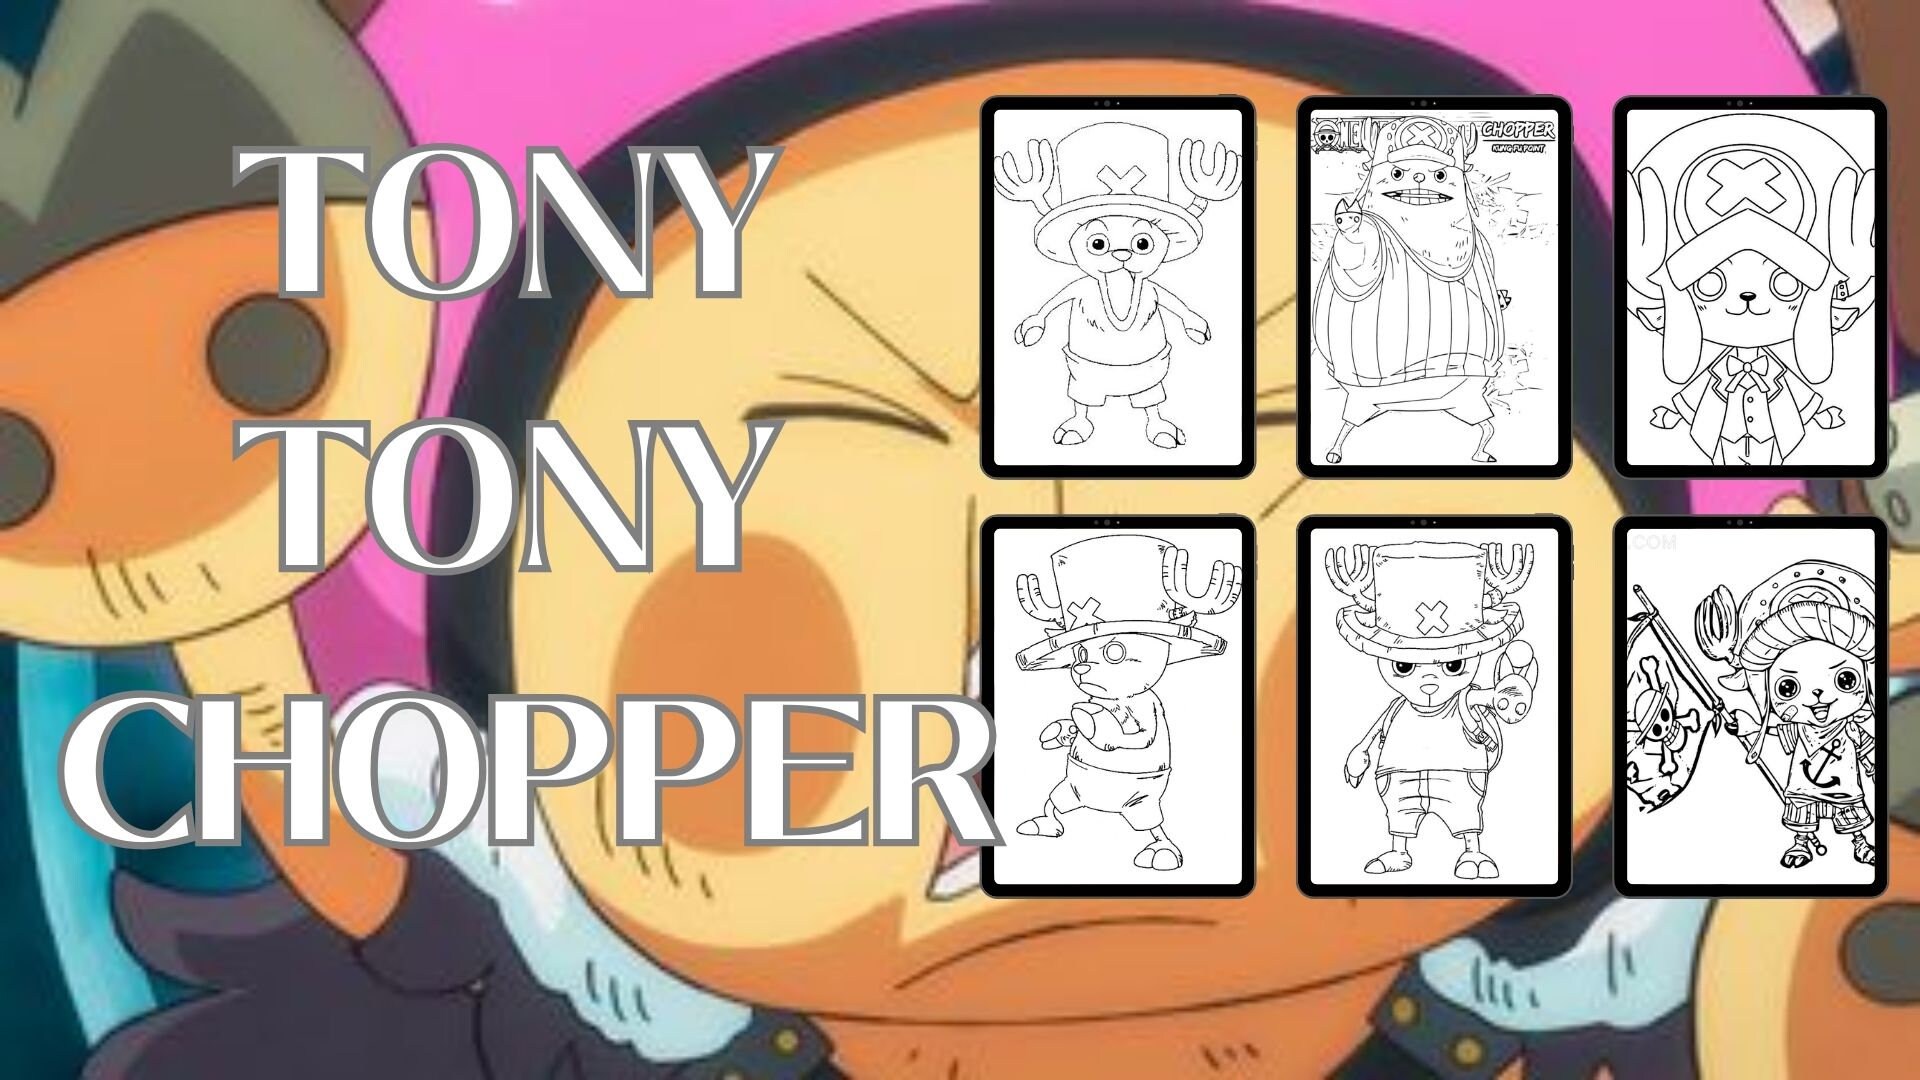 Explore the Captivating World of Zoro and Chopper on Tumblr